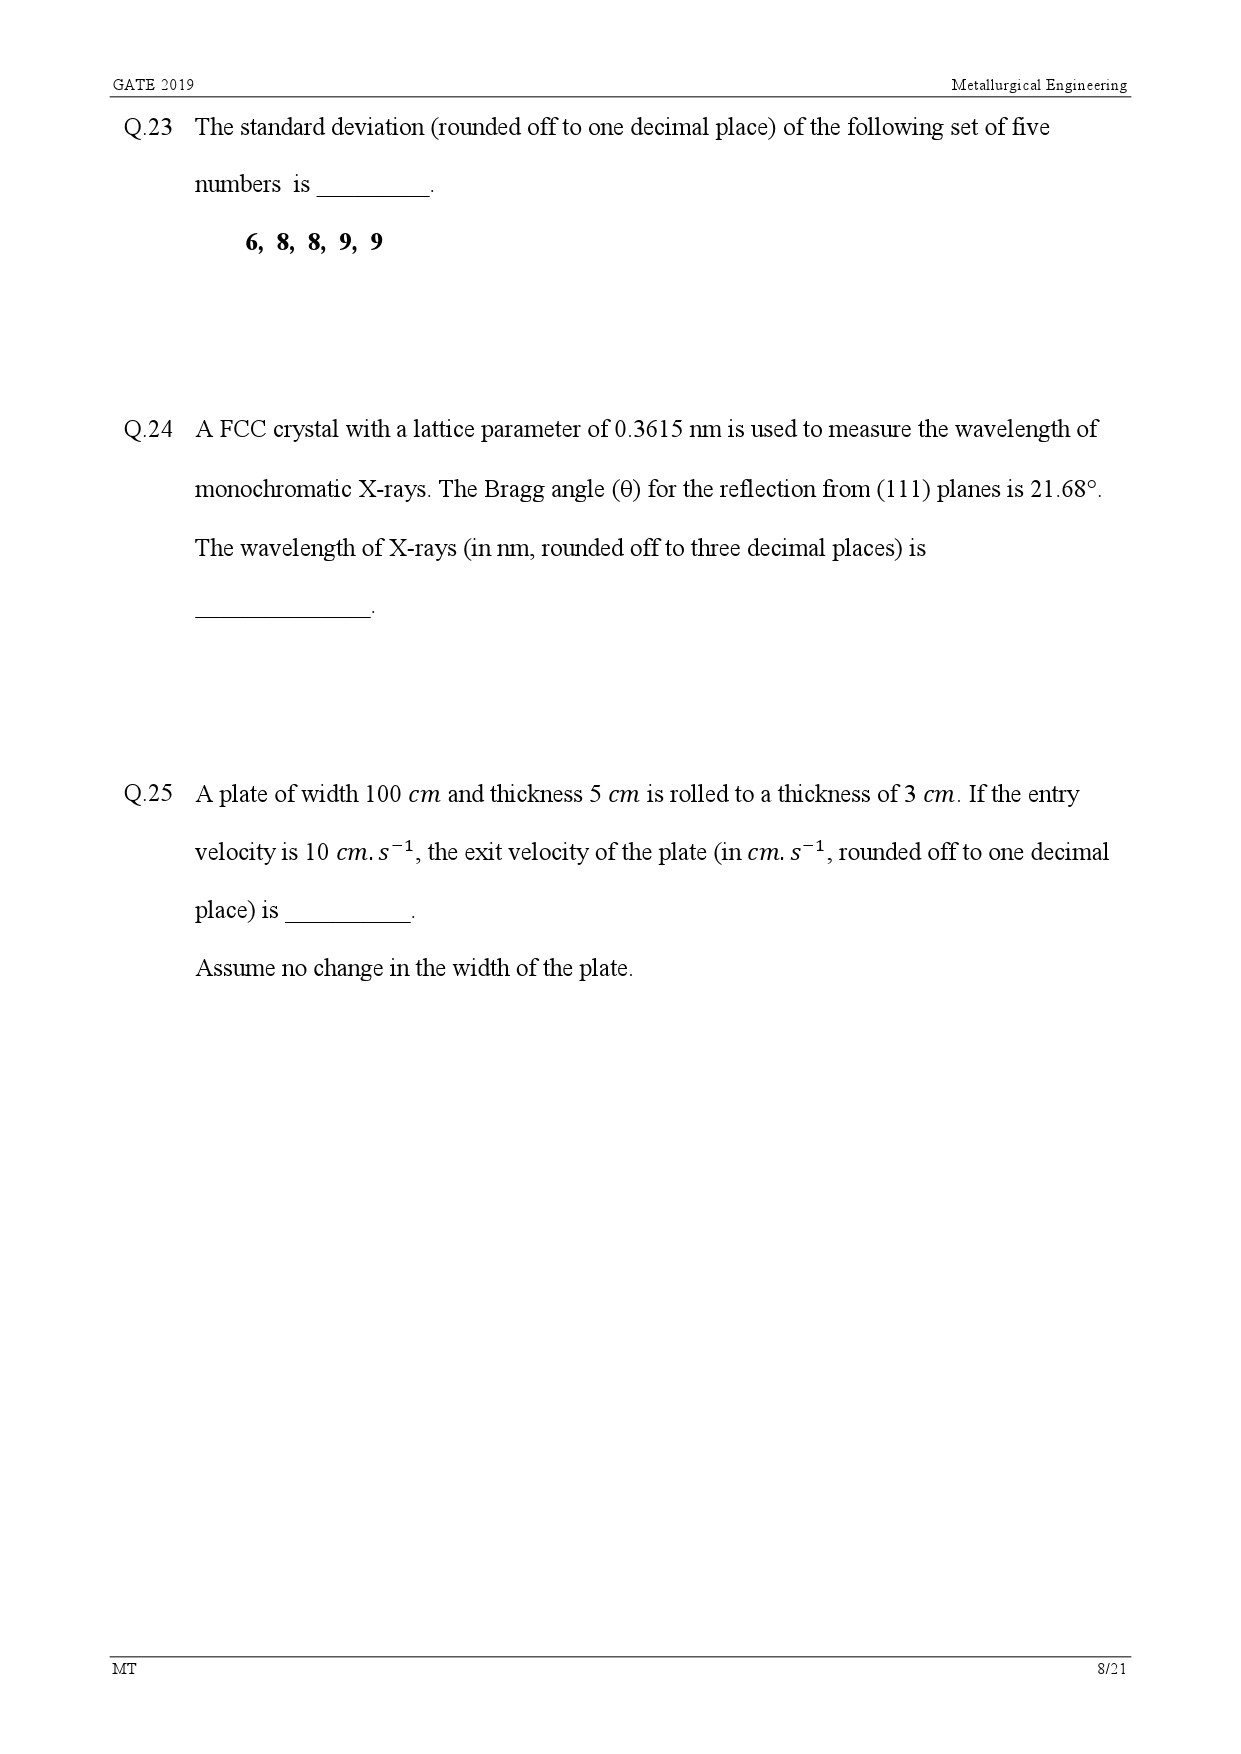 GATE Exam Question Paper 2019 Metallurgical Engineering 11